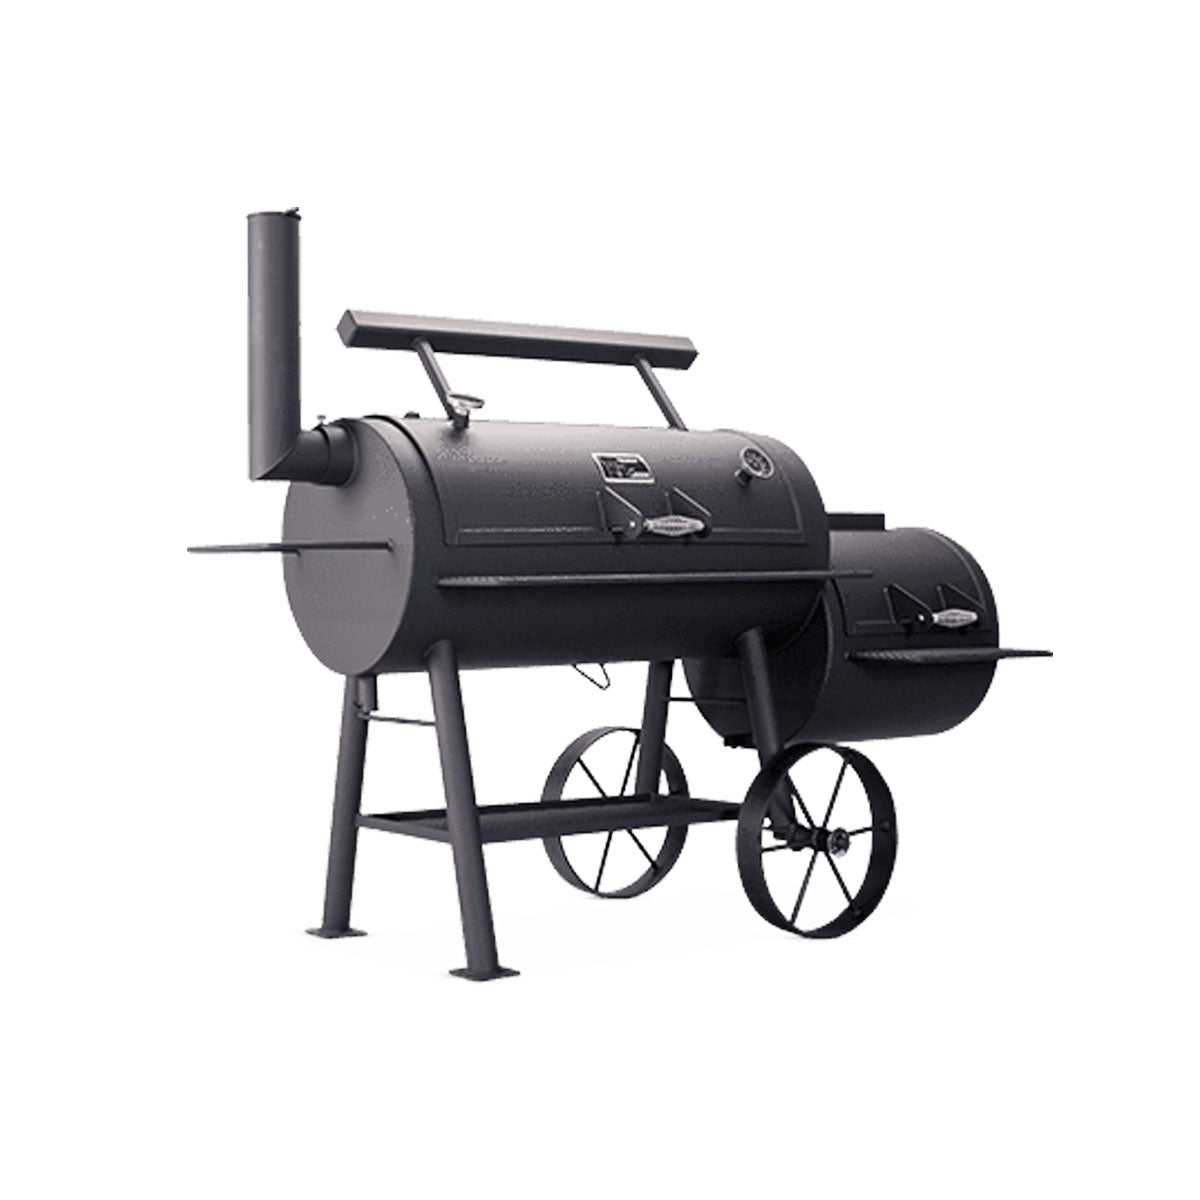 Yoder Smokers (@yodersmokers) • Instagram photos and videos